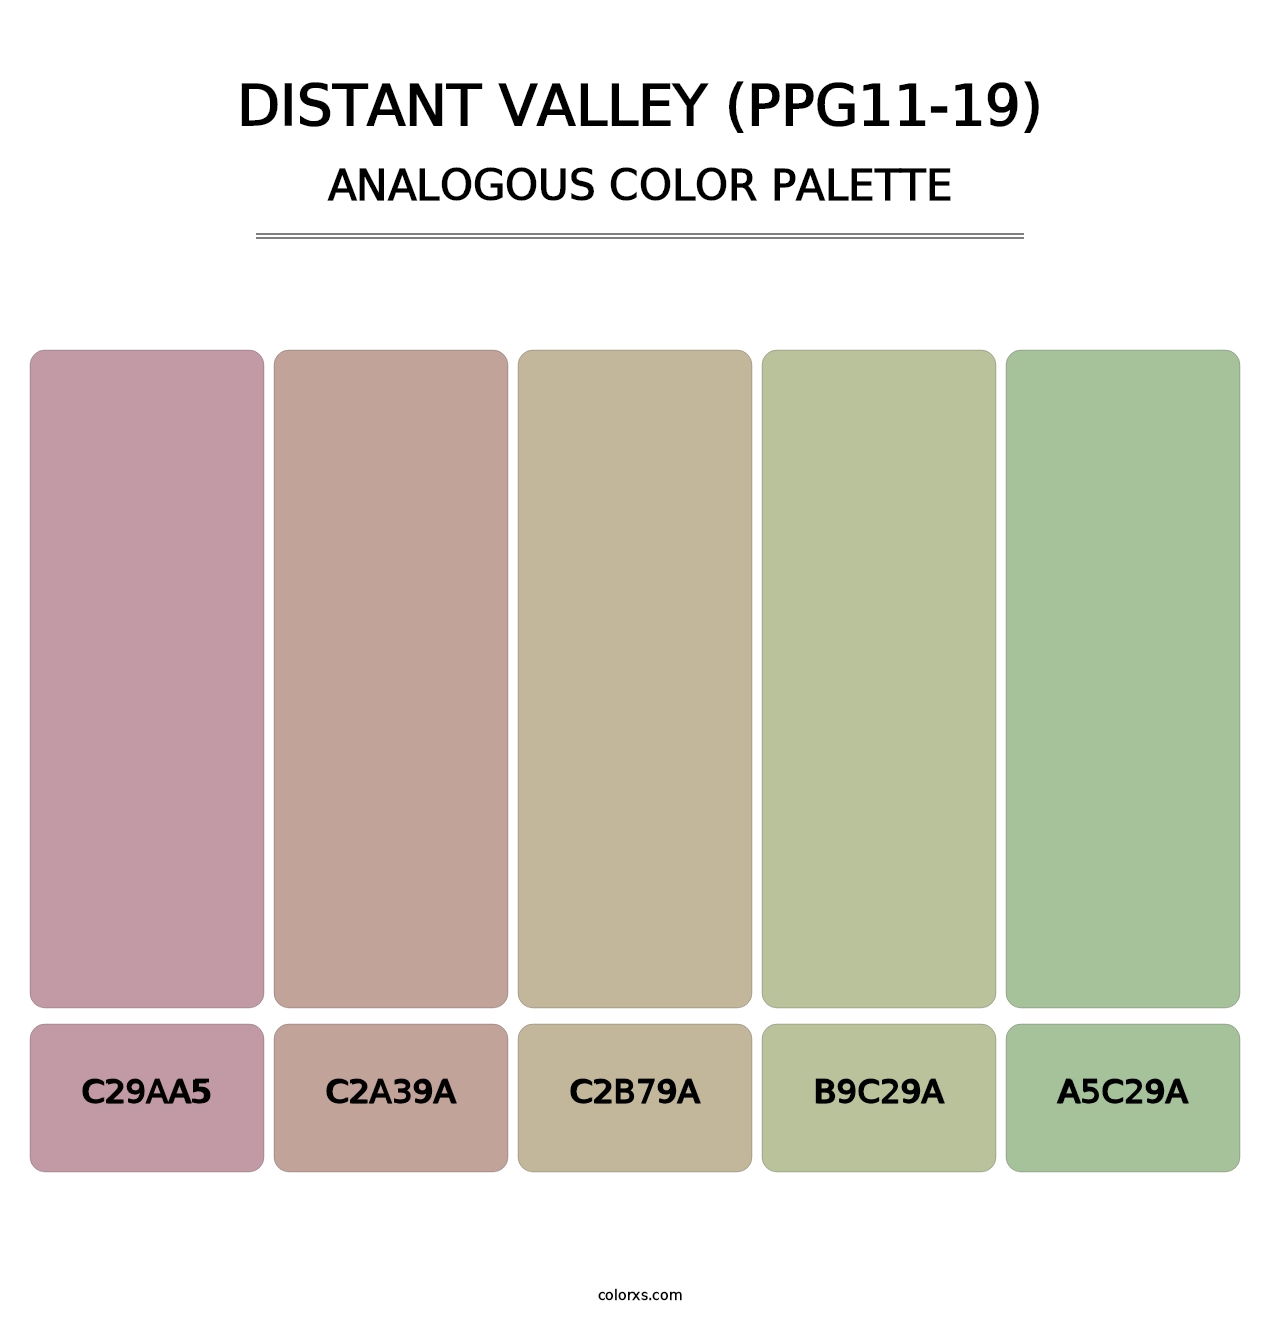 Distant Valley (PPG11-19) - Analogous Color Palette